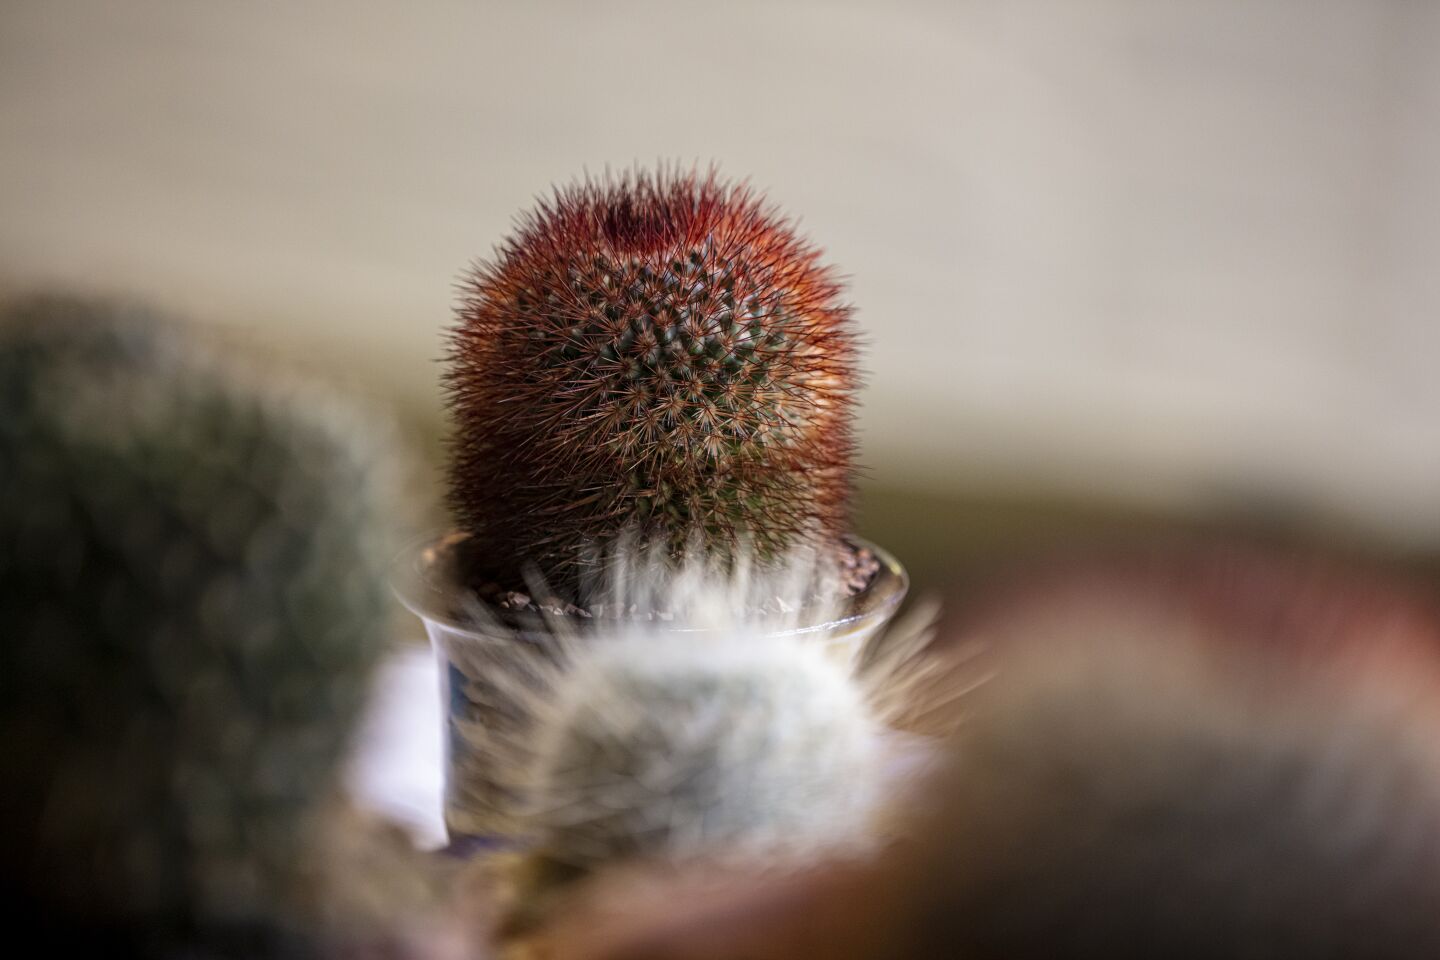 A Mammillaria spinosissima v. rubrissima entered by grower Sandy Chase of Sylmar was one of dozens of bulbous mammillaria on exhibit. This cactus from Mexico is prized for its red-tinged bristles.